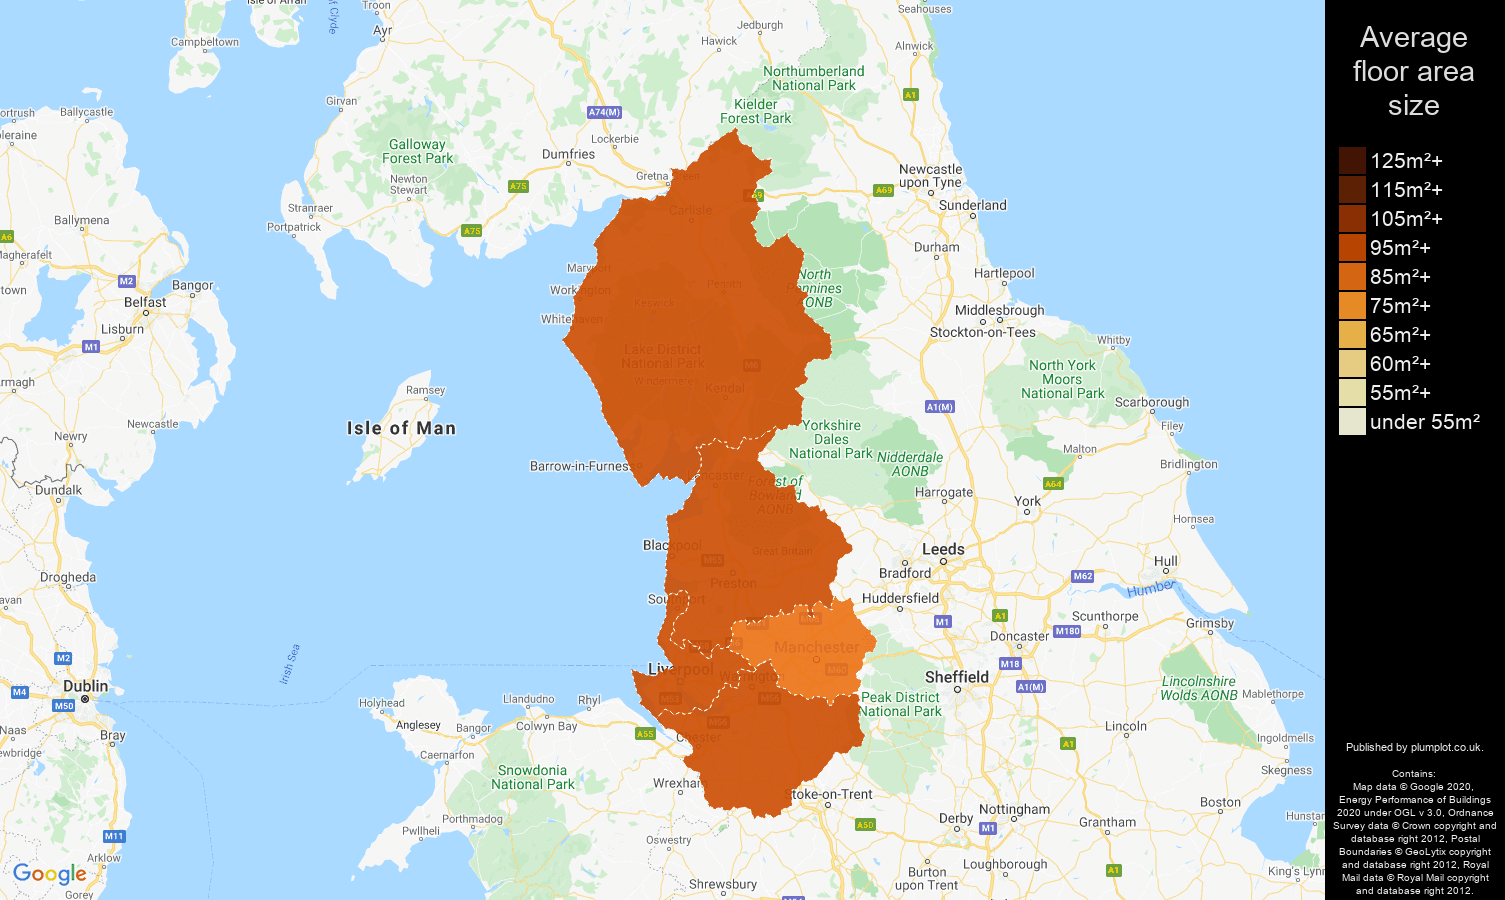 North West map of average floor area size of houses